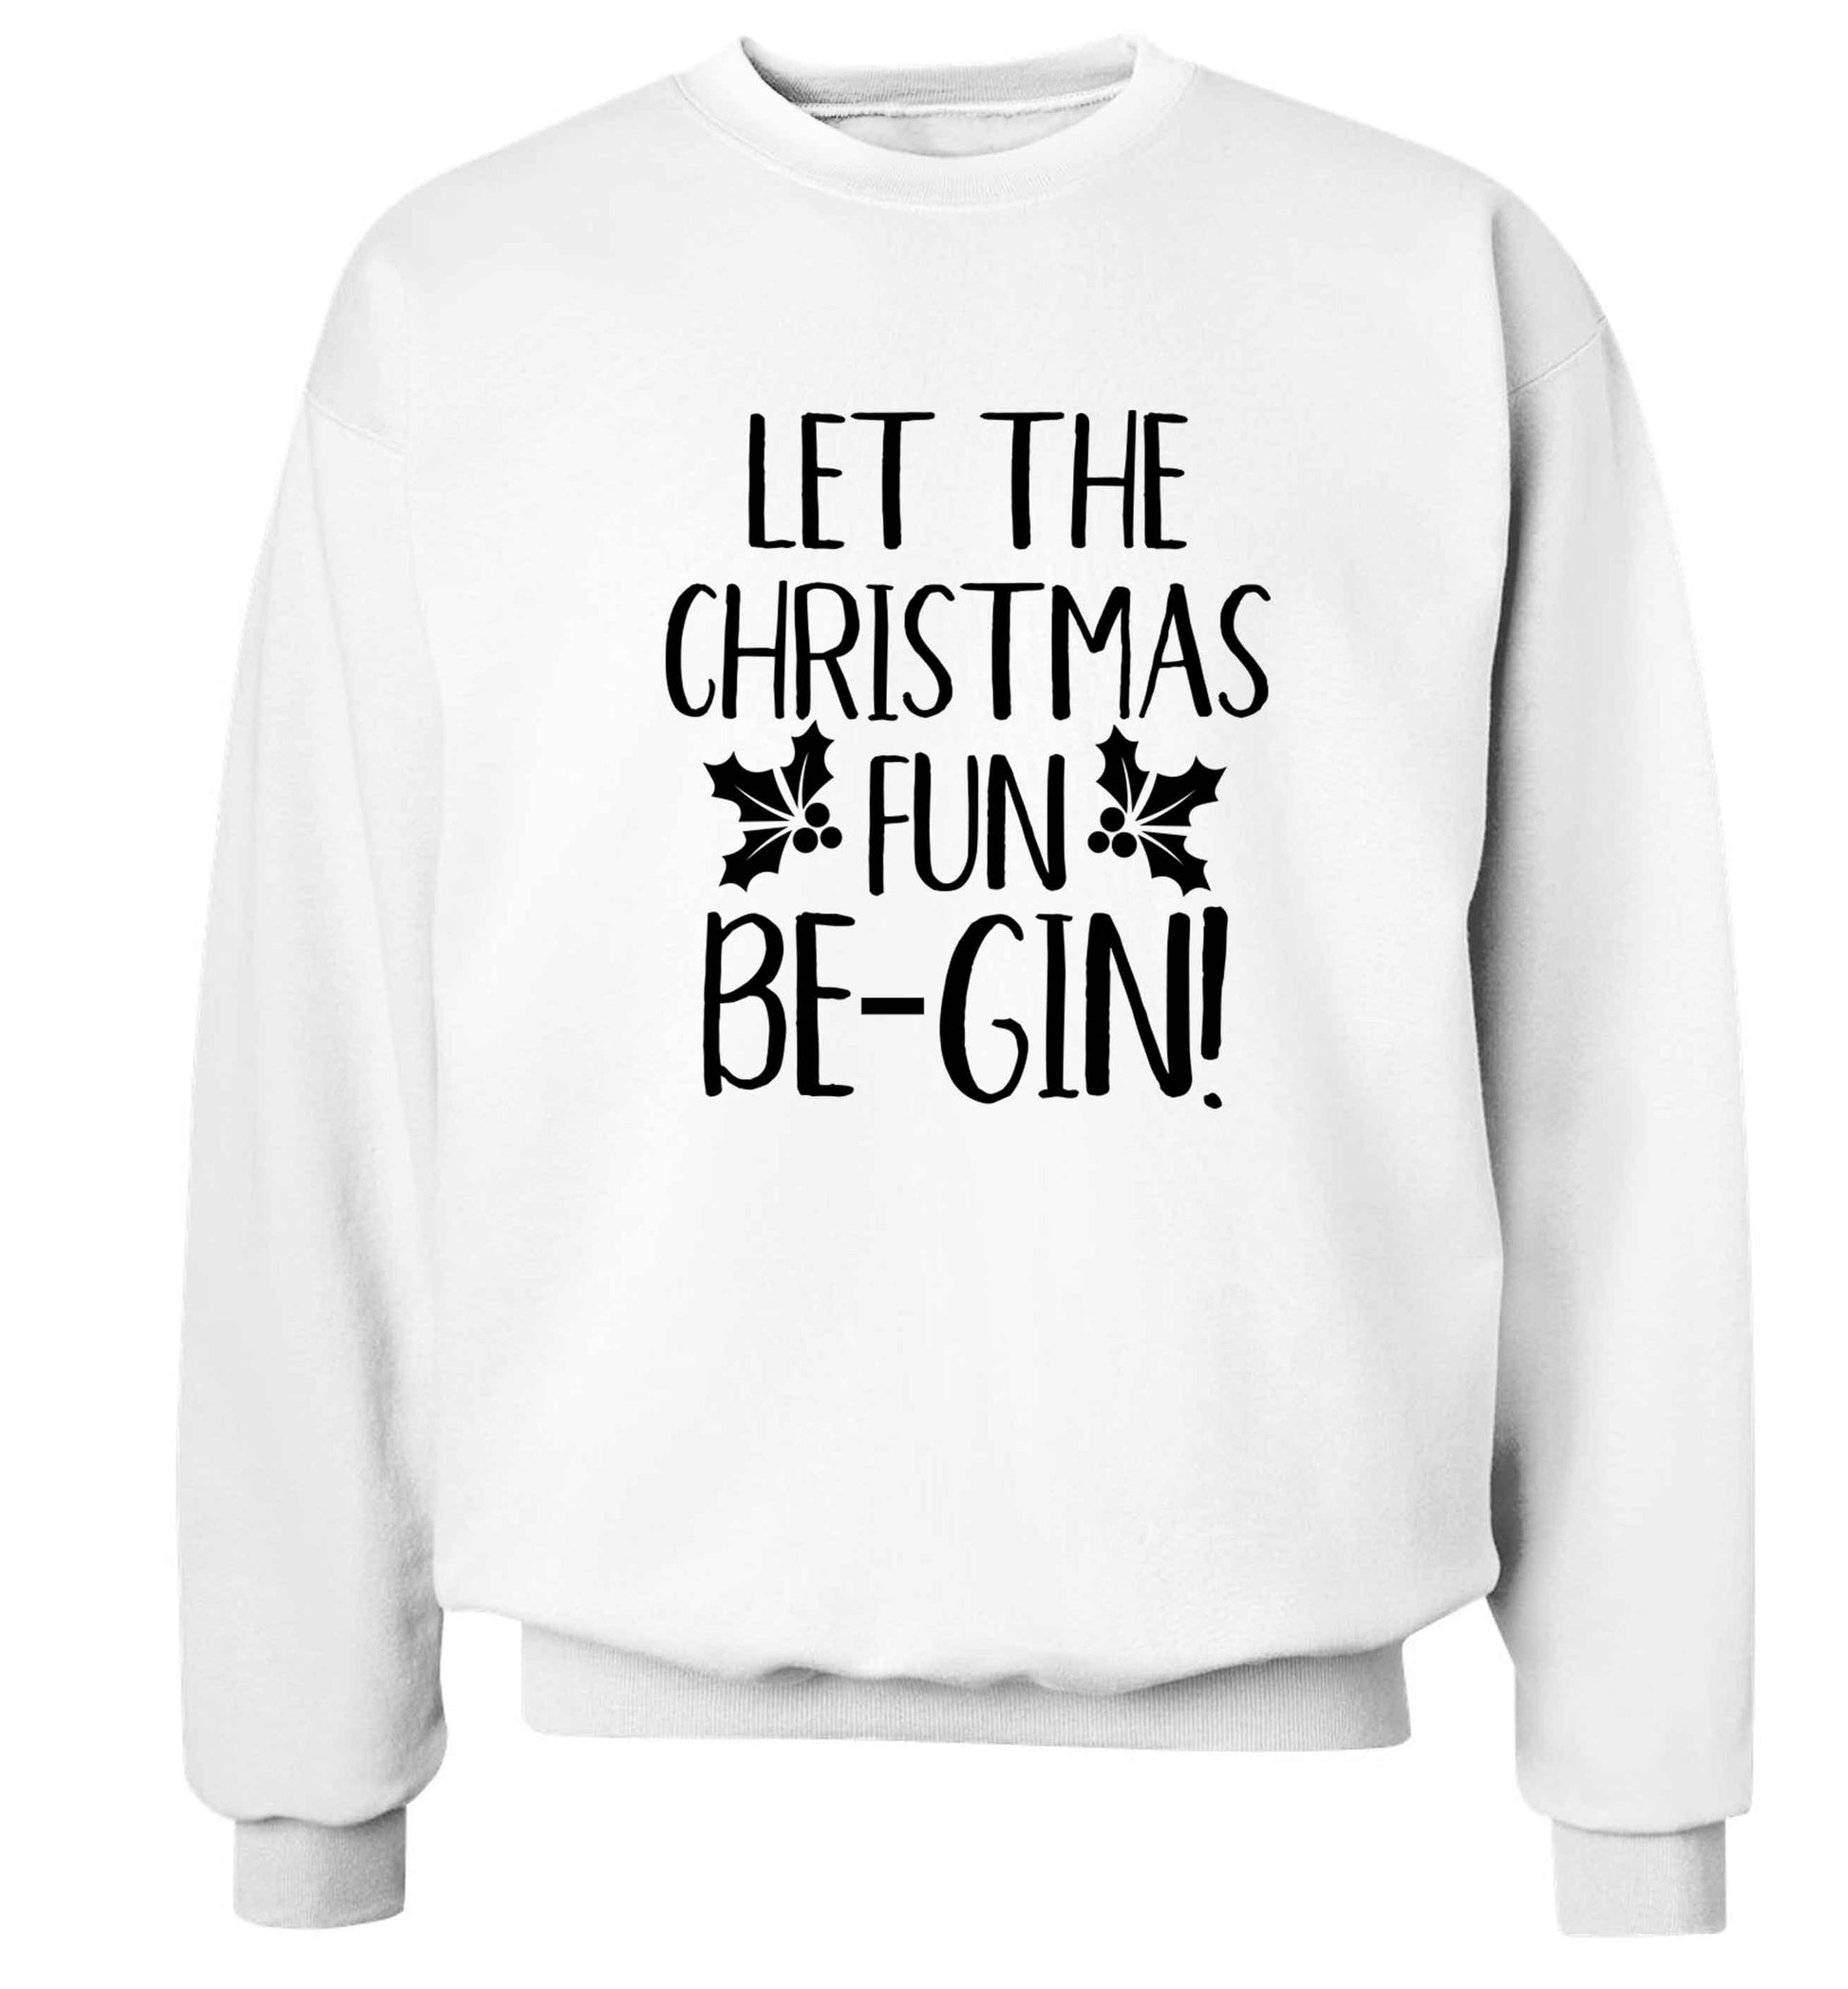 Let the christmas fun be-gin Adult's unisex white Sweater 2XL